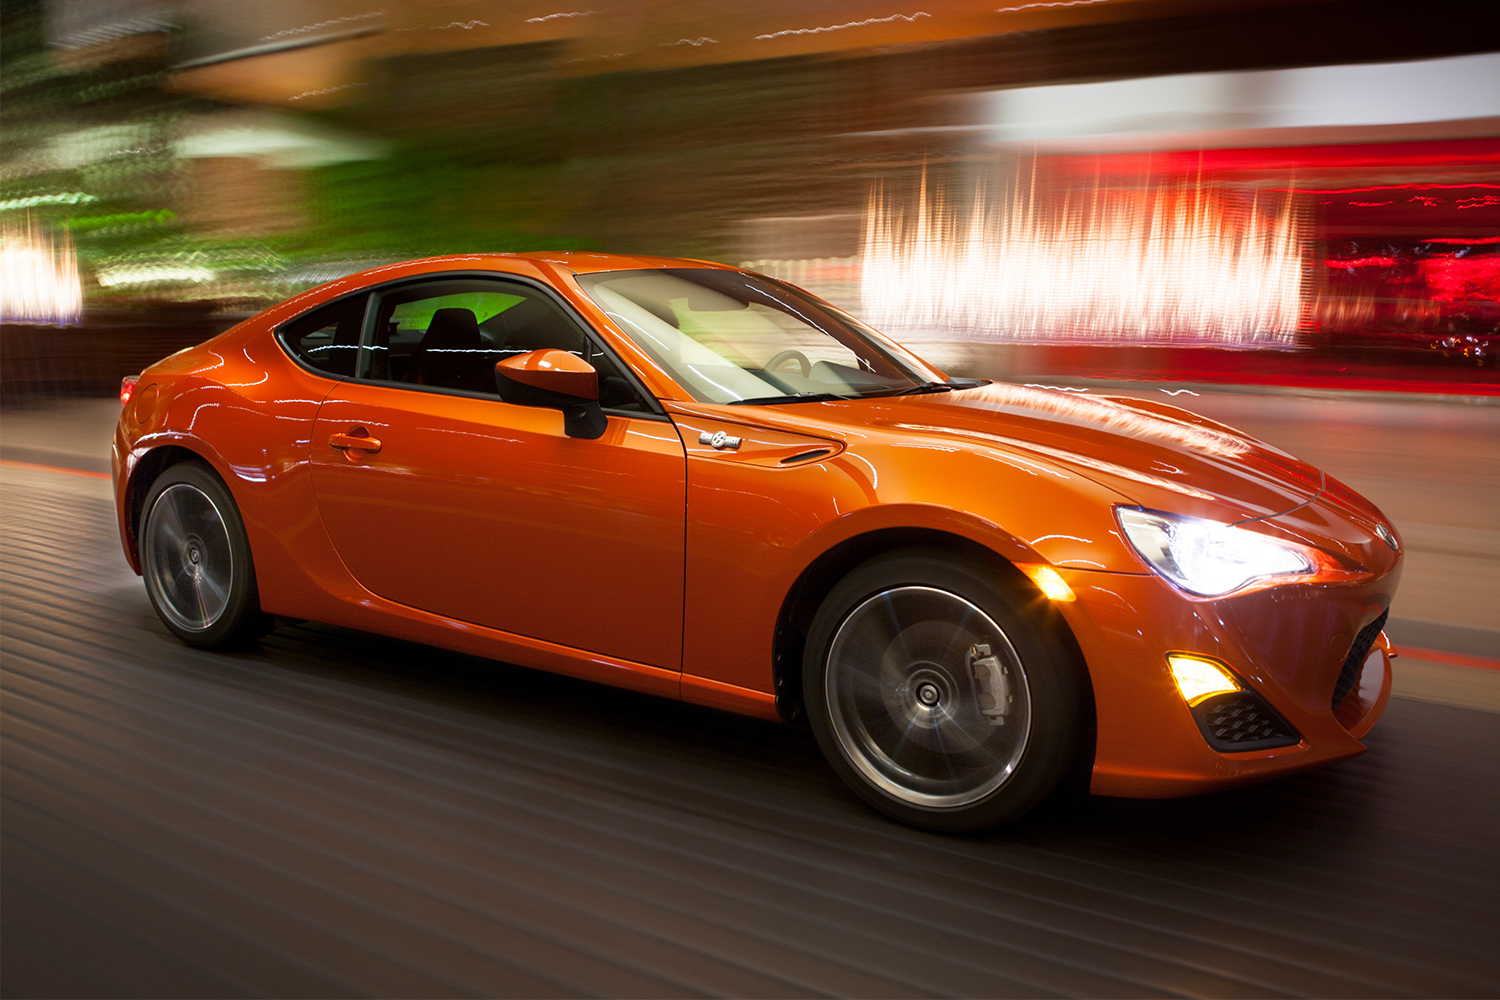 The 2013 Scion FR-S sports car in orange driving at night 